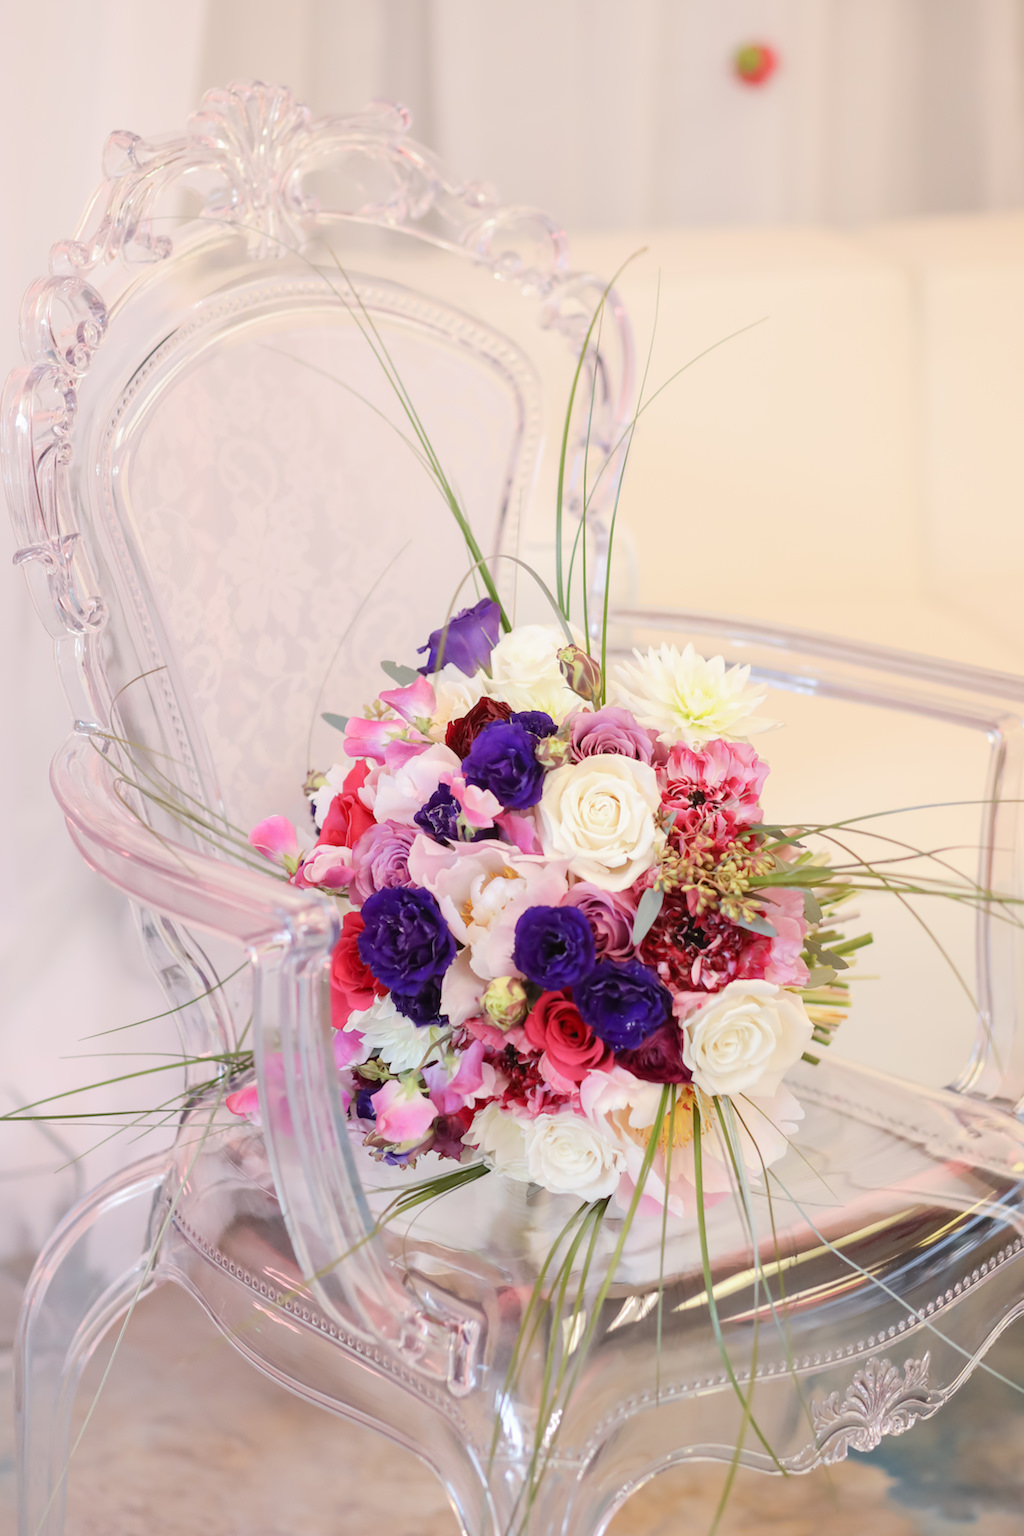 Purple, White Rose, Pink and Red Floral with Decorative Grasses Bridal Bouquet in Victorian Inspired Clear Plastic Arm Chair | Clearwater FL Wedding Event Rentals and Florist Gabro Event Services